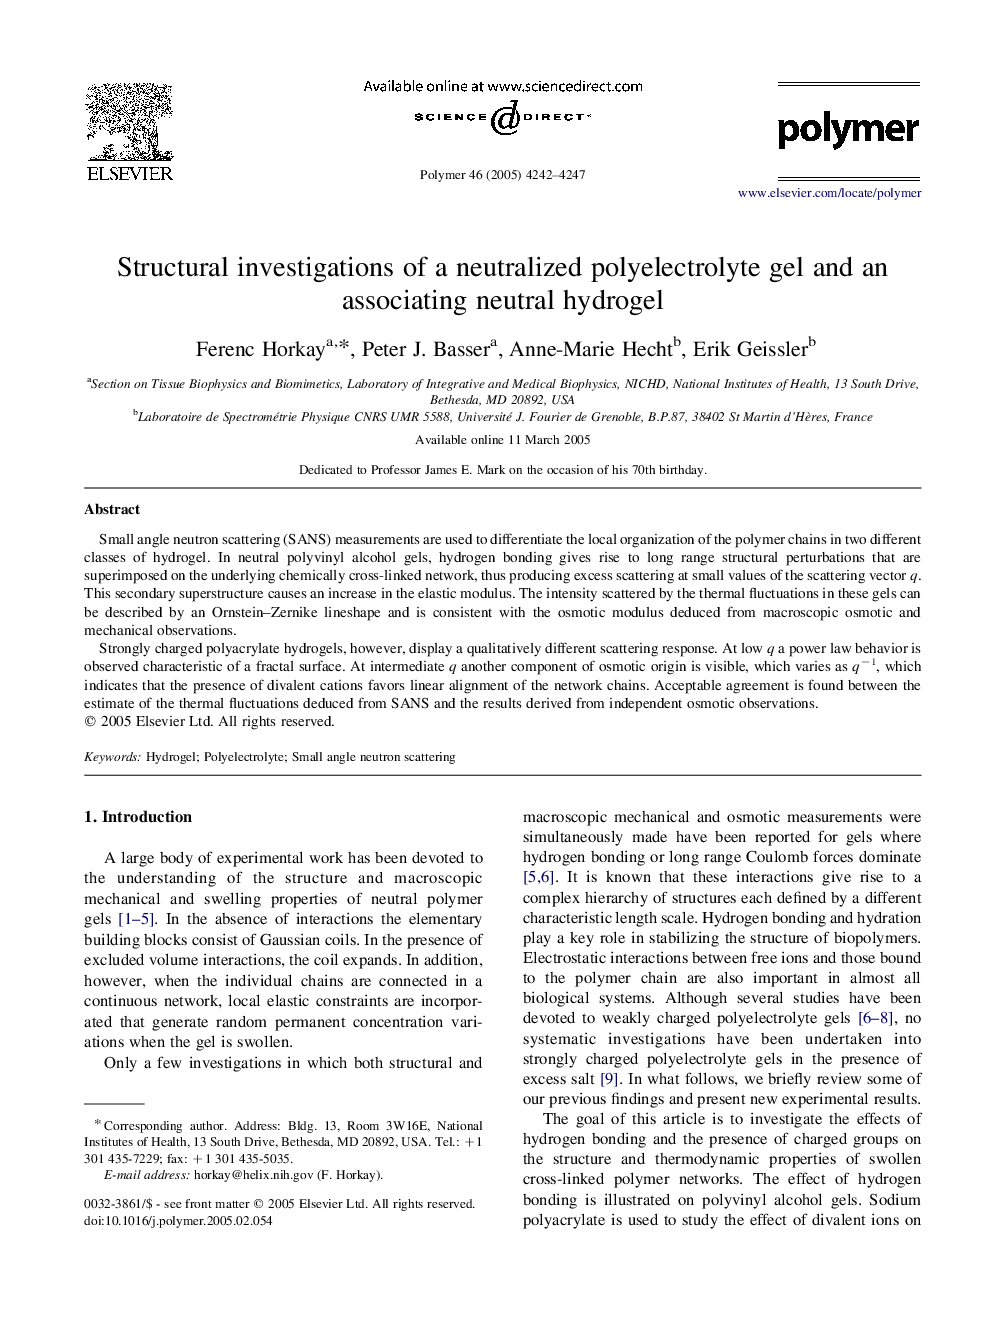 Structural investigations of a neutralized polyelectrolyte gel and an associating neutral hydrogel